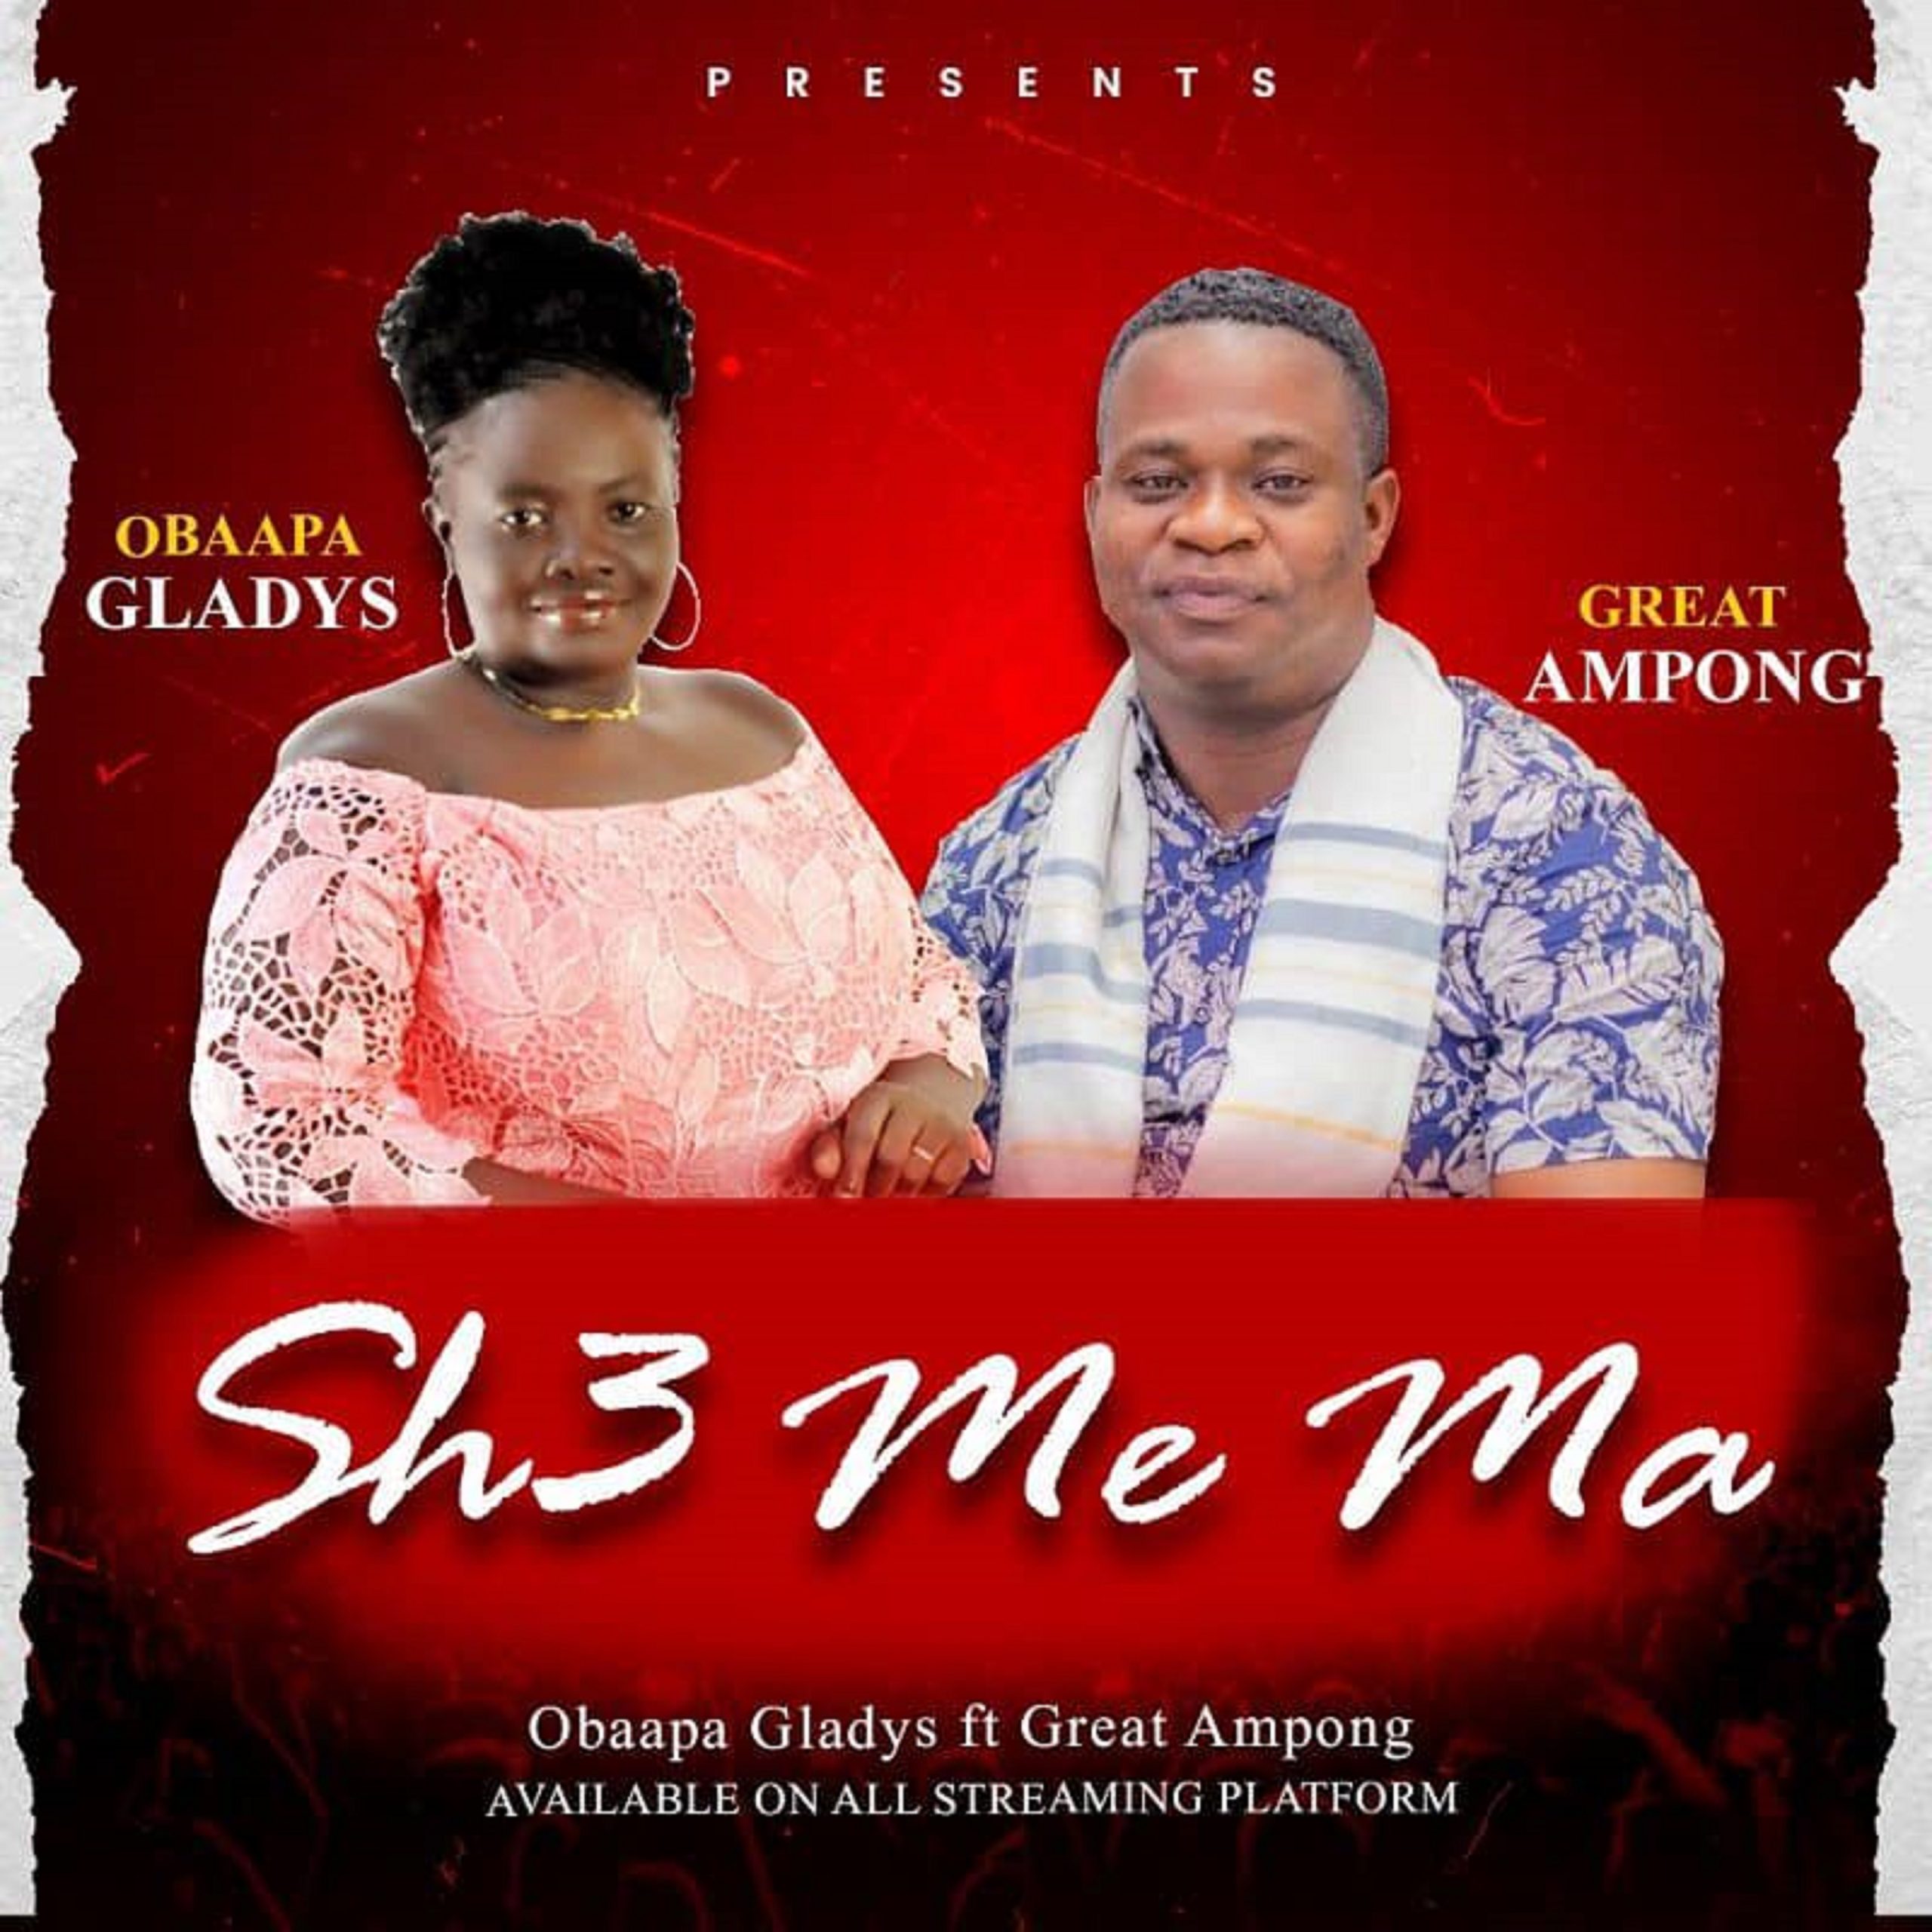 Obaapa Gladys Sh3 Me Ma Ft. Great Ampong